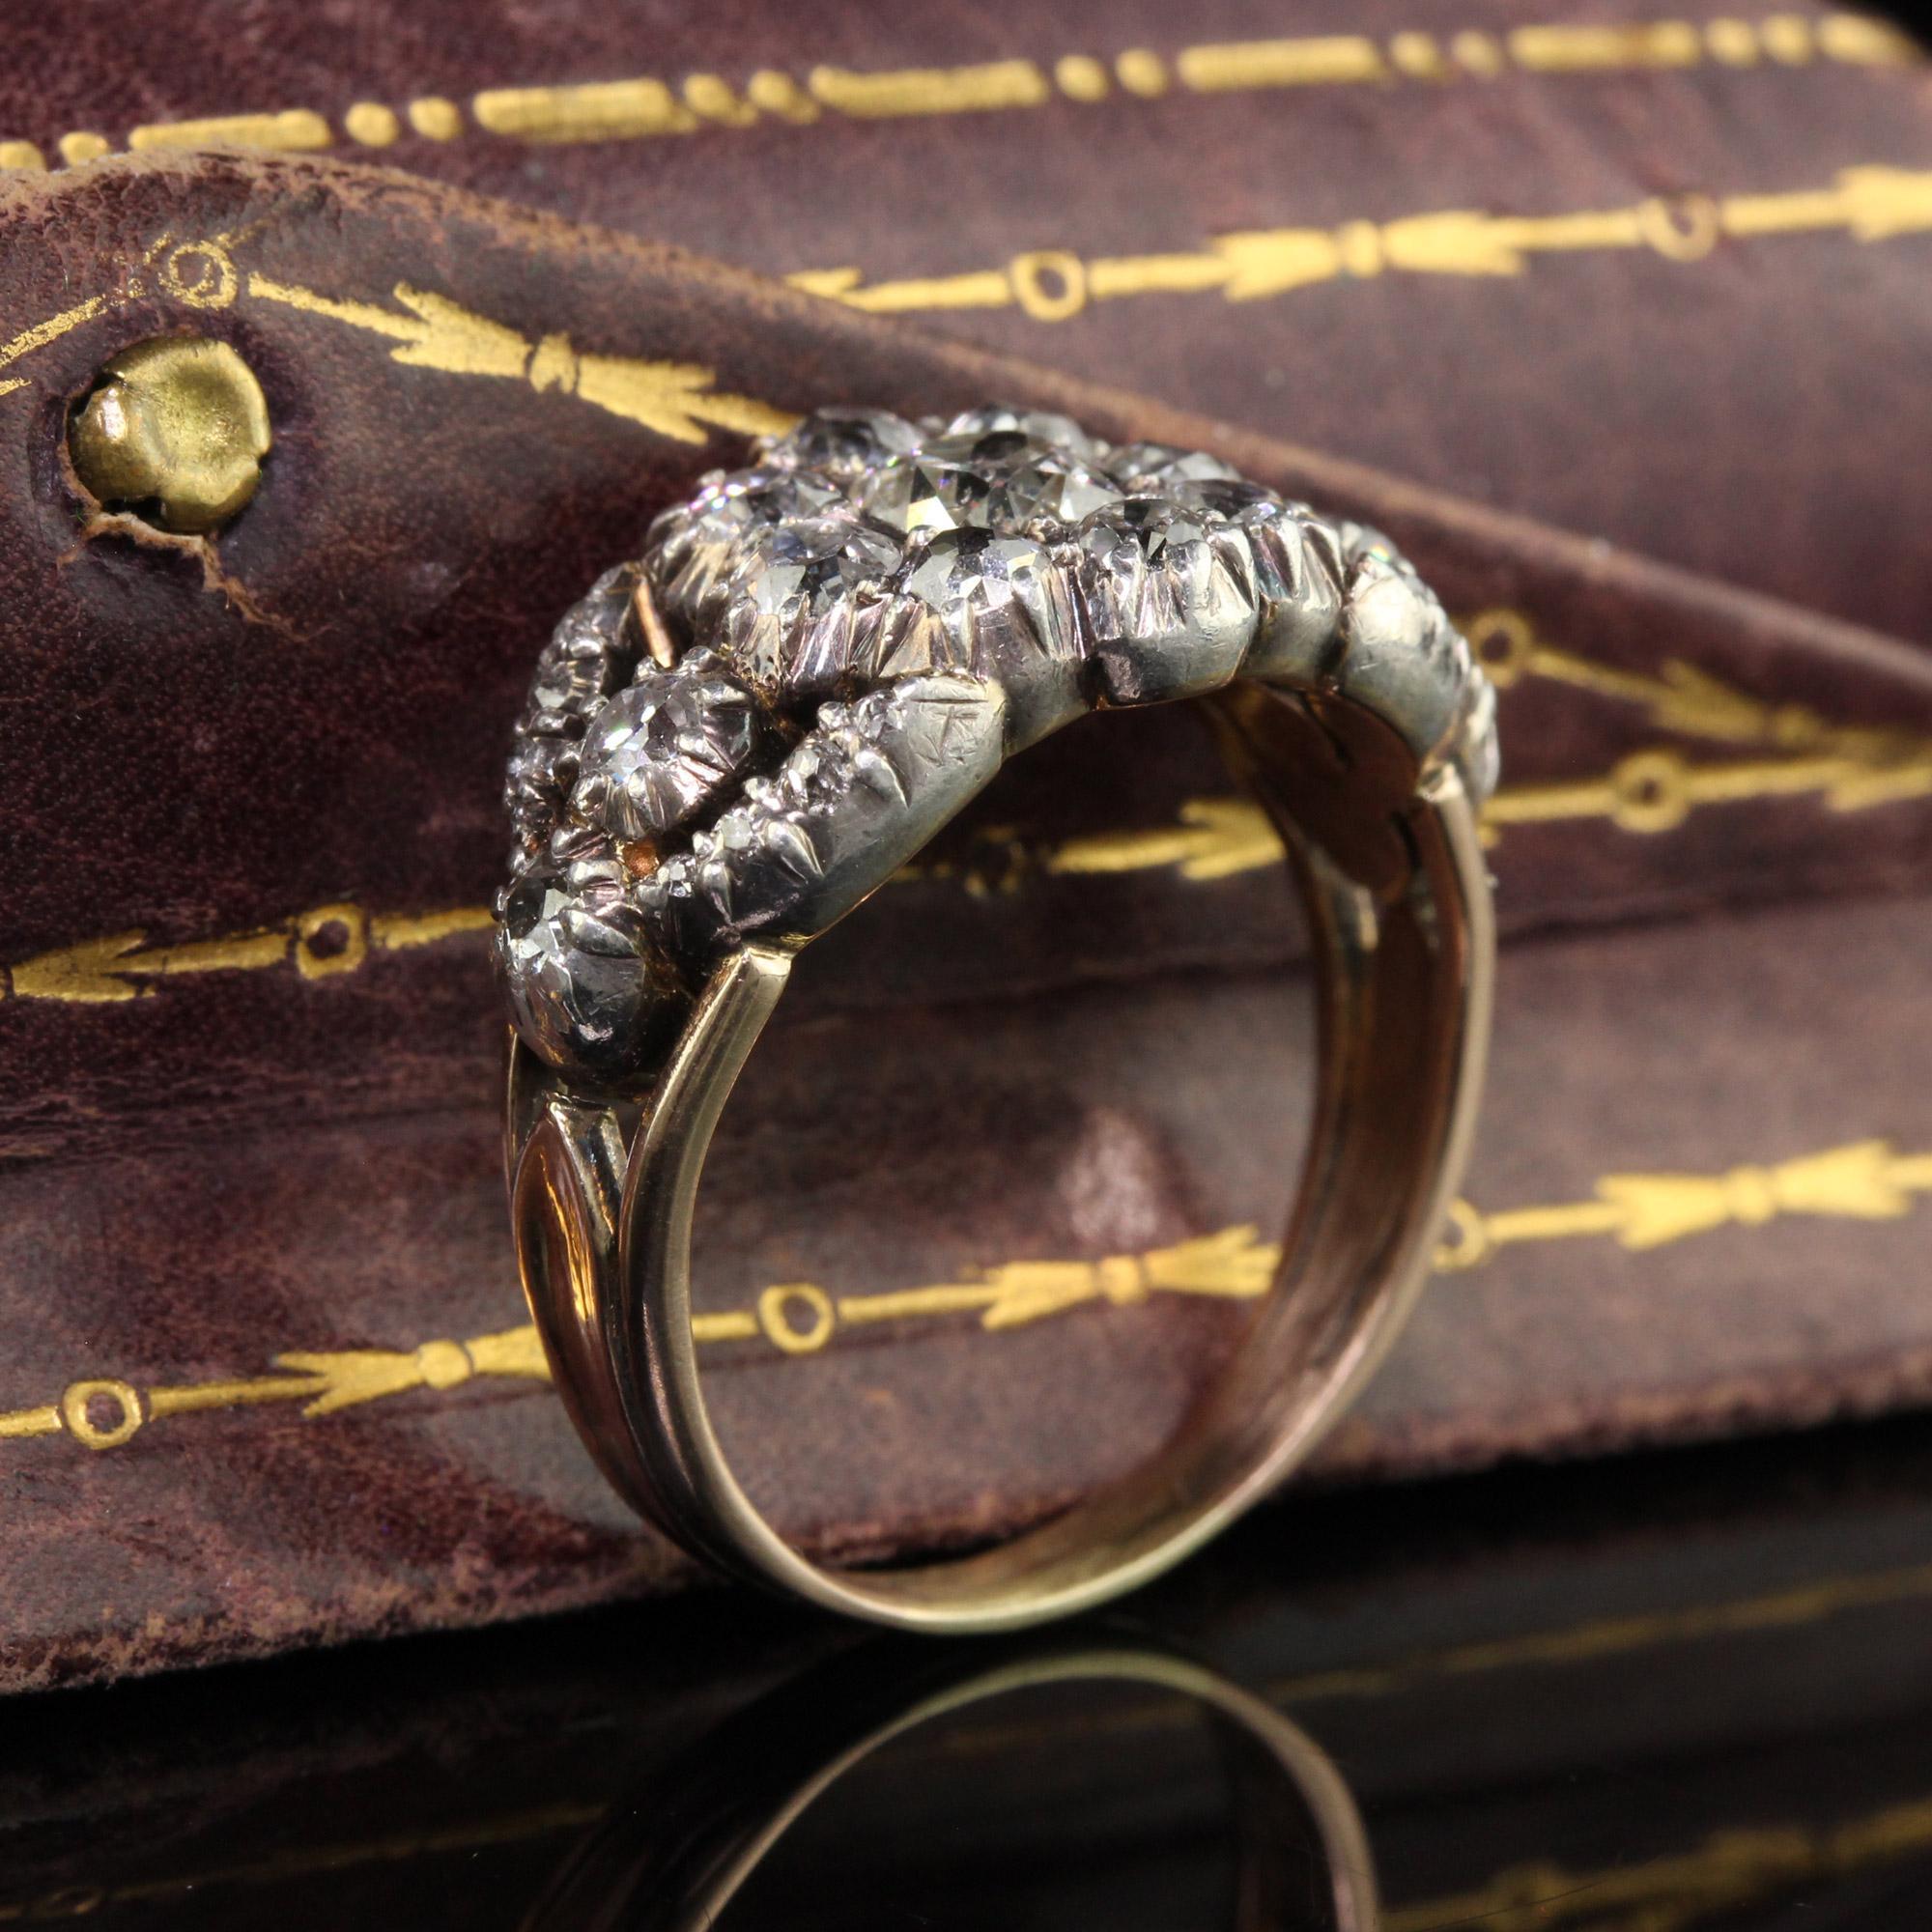 Beautiful Antique Georgian 18K Gold Silver Top Old Mine Diamond Cluster Engagement Ring. This incredible Georgian engagement ring is crafted in 18k yellow gold and silver top. The center holds a gorgeous old mine cut diamond with mirror like facets